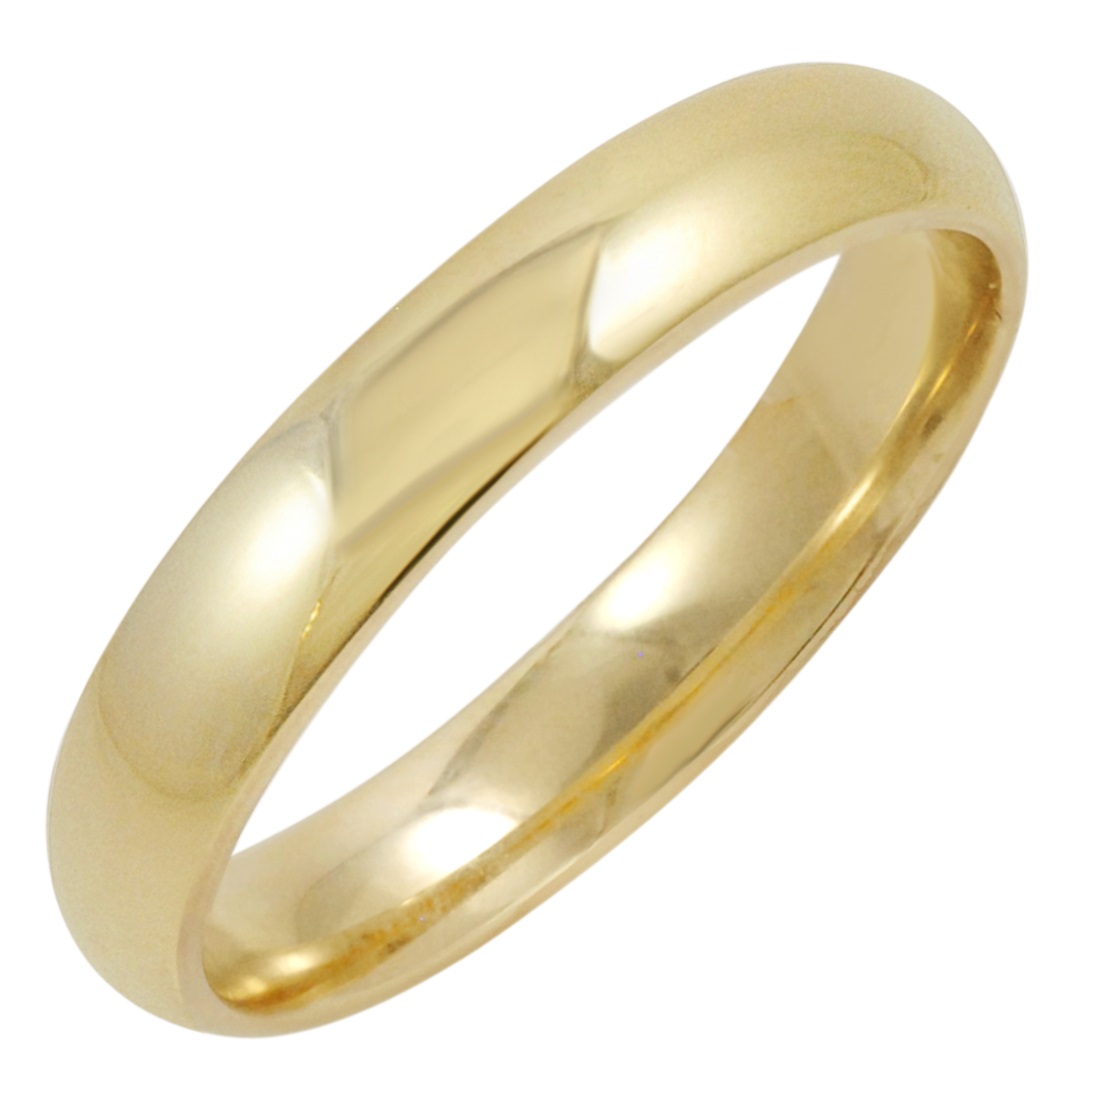 4mm Mens 10k Yellow Gold Comfort Fit Plain Wedding Band - Size 10.5